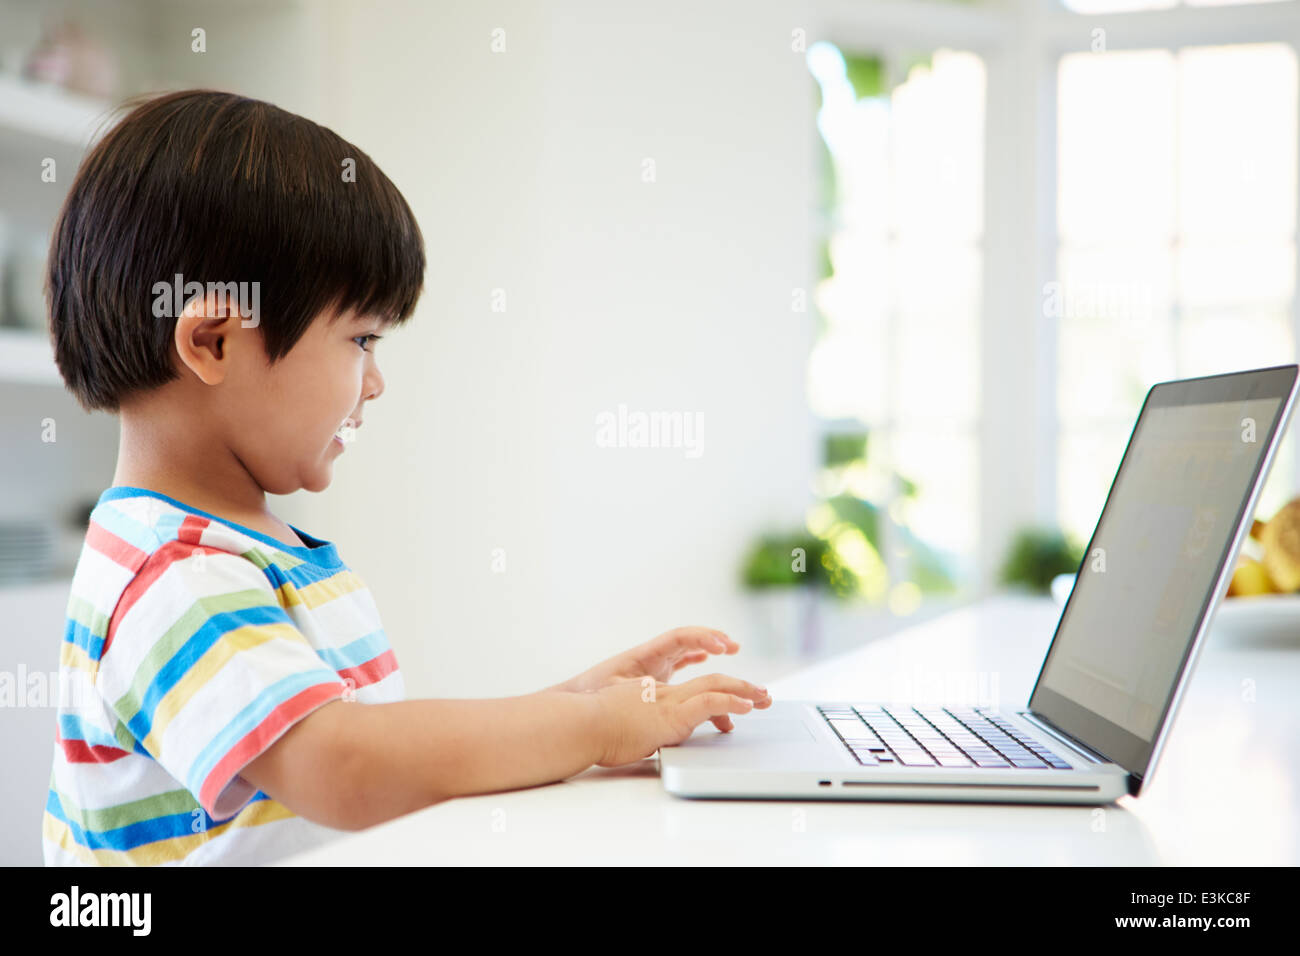 Asian Child Using Laptop At Home Stock Photo